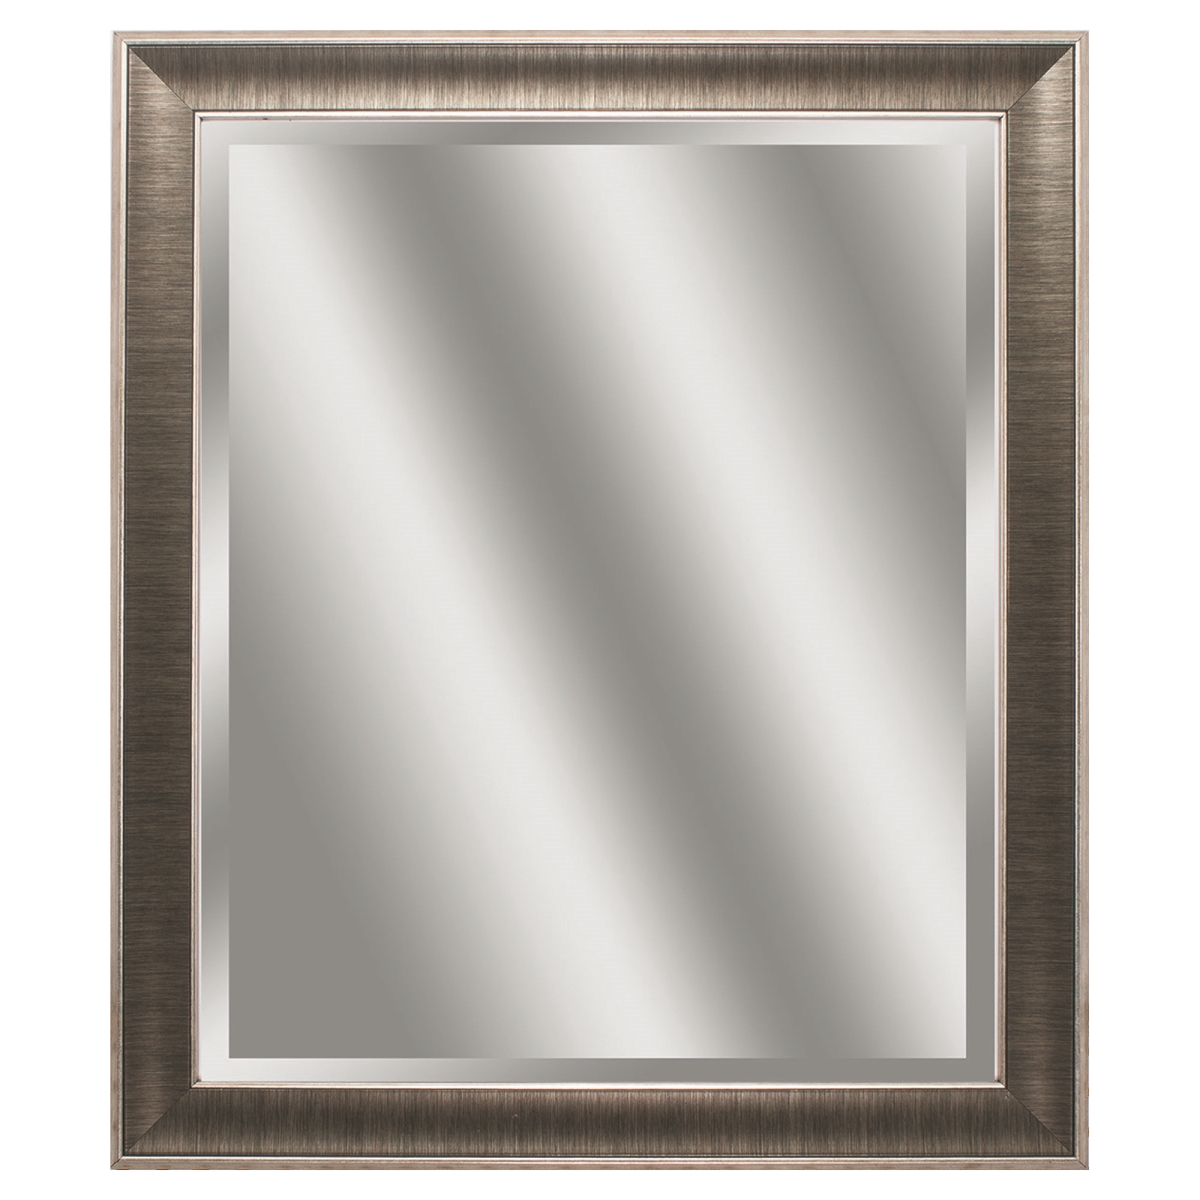 Picture of Propac Images 9941 Beveled Mirror - Gunmetal Gray Frame